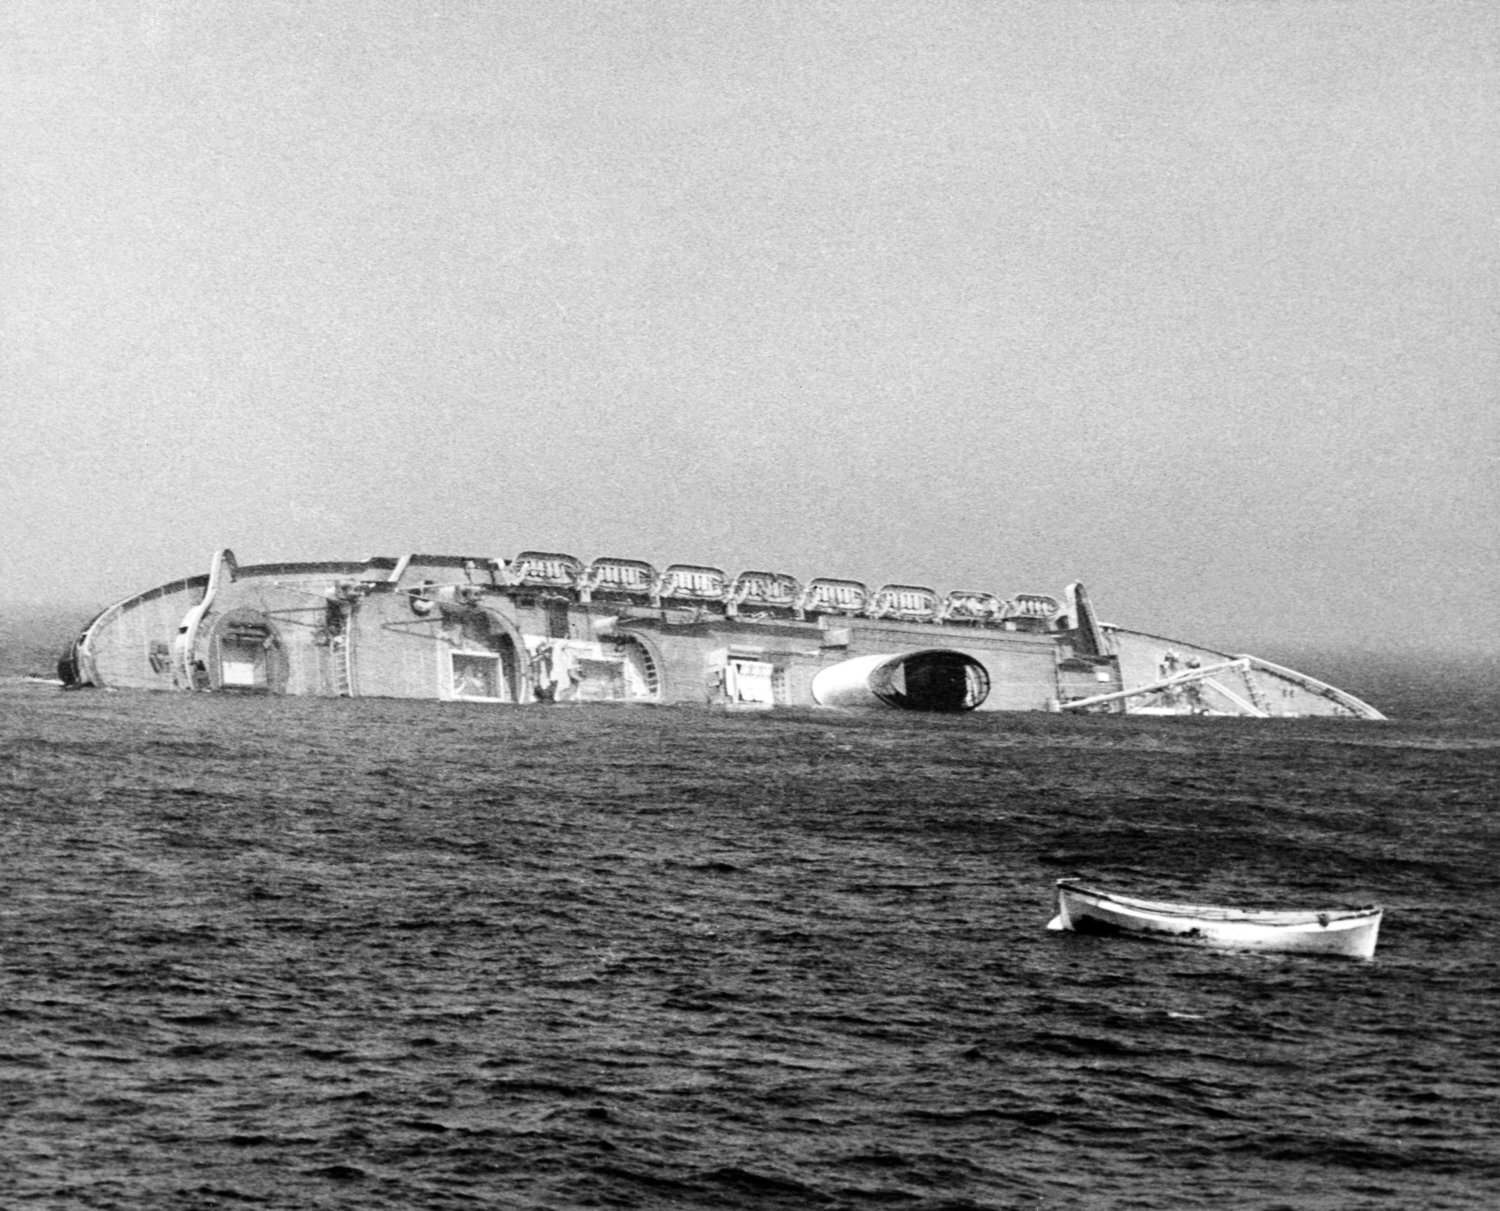 This photo, one of a series which won a Pulitzer Prize for photographer Harry Trask, shows the Andrea Doria in its final moments with an empty lifeboat in the foreground.